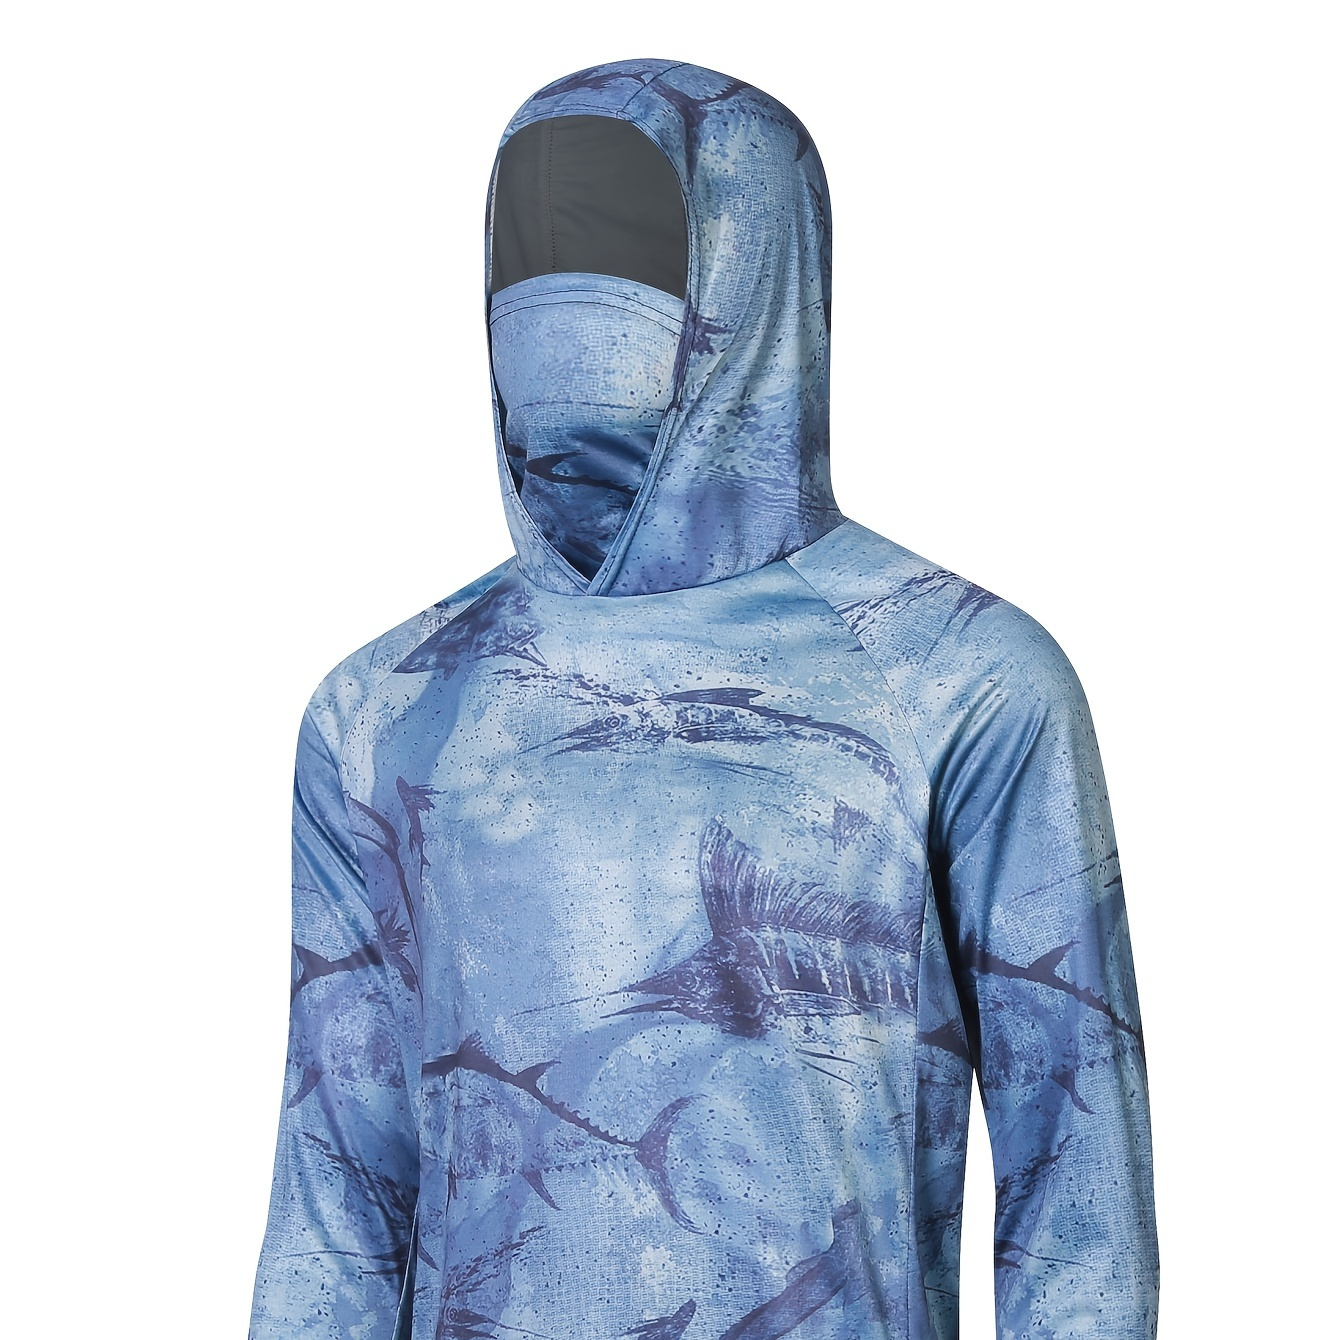 

Men's Sun Protection Hooded Shirt With Mask, Active Swordfish Print Quick Dry Slightly Stretch Long Sleeve Rash Guard For Fishing Hiking Cycling Outdoor